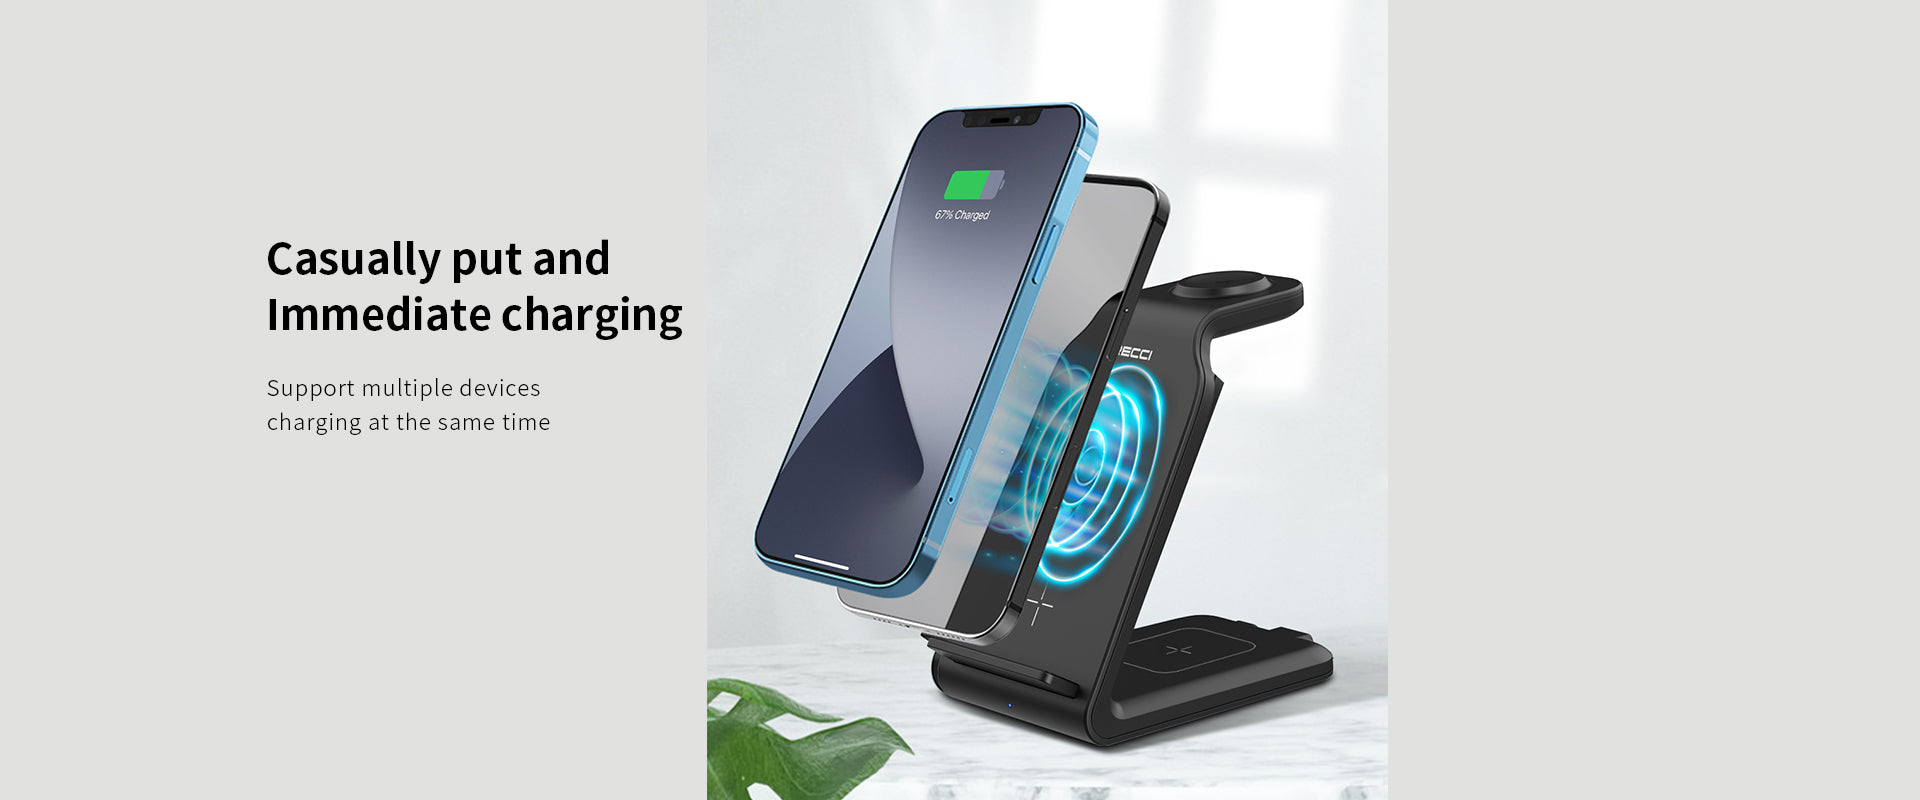 RCW-16 4 IN 1 Wireless Charger Desktop Stand